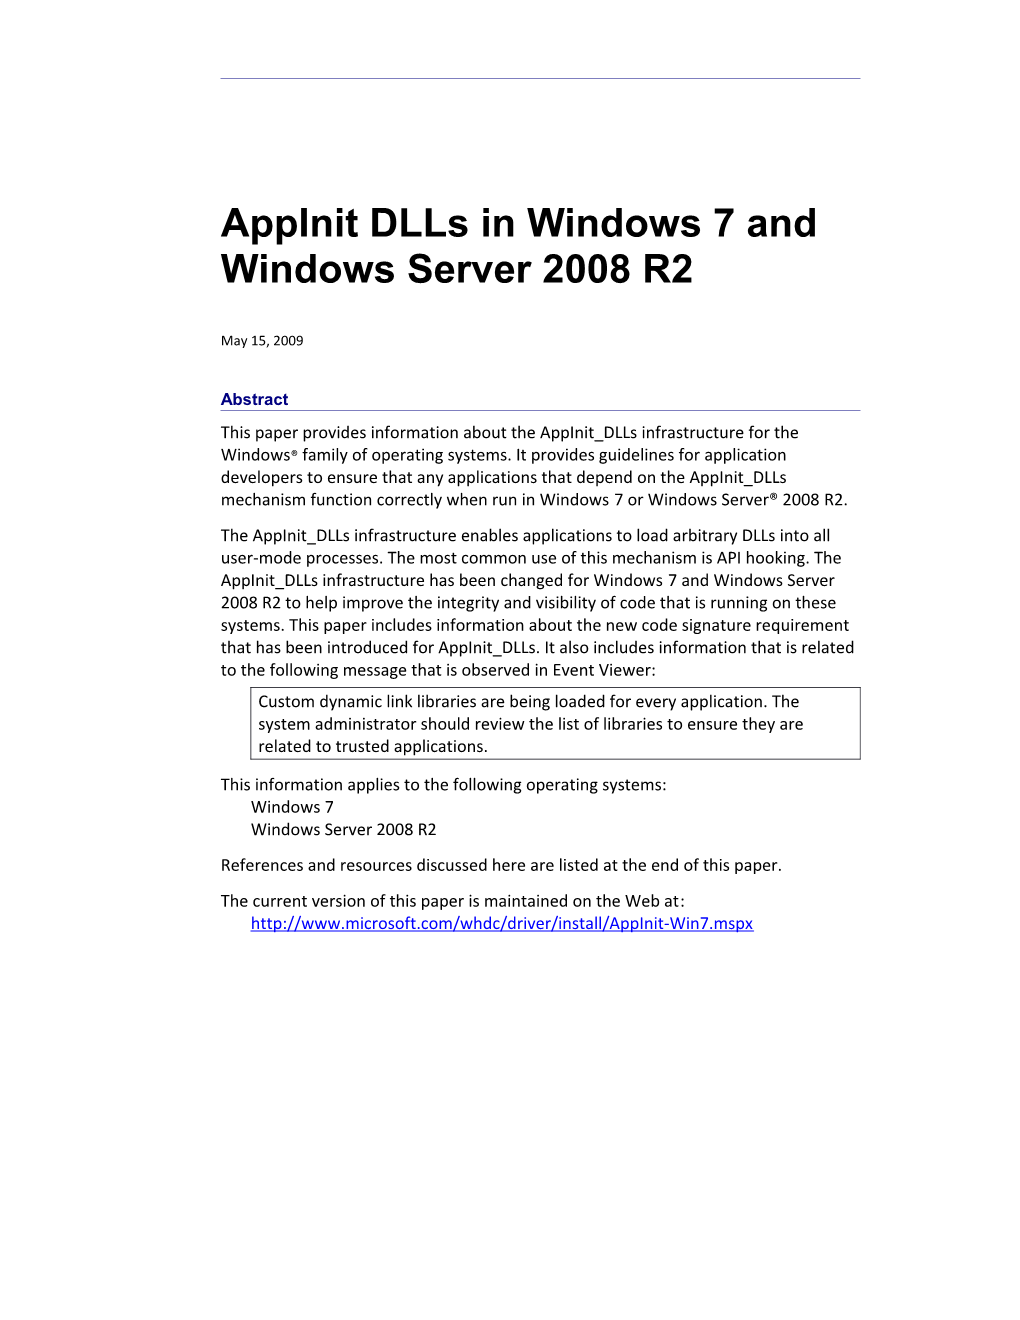 Appinit Dlls in Windows 7 and Windows Server 2008 R2 - 2